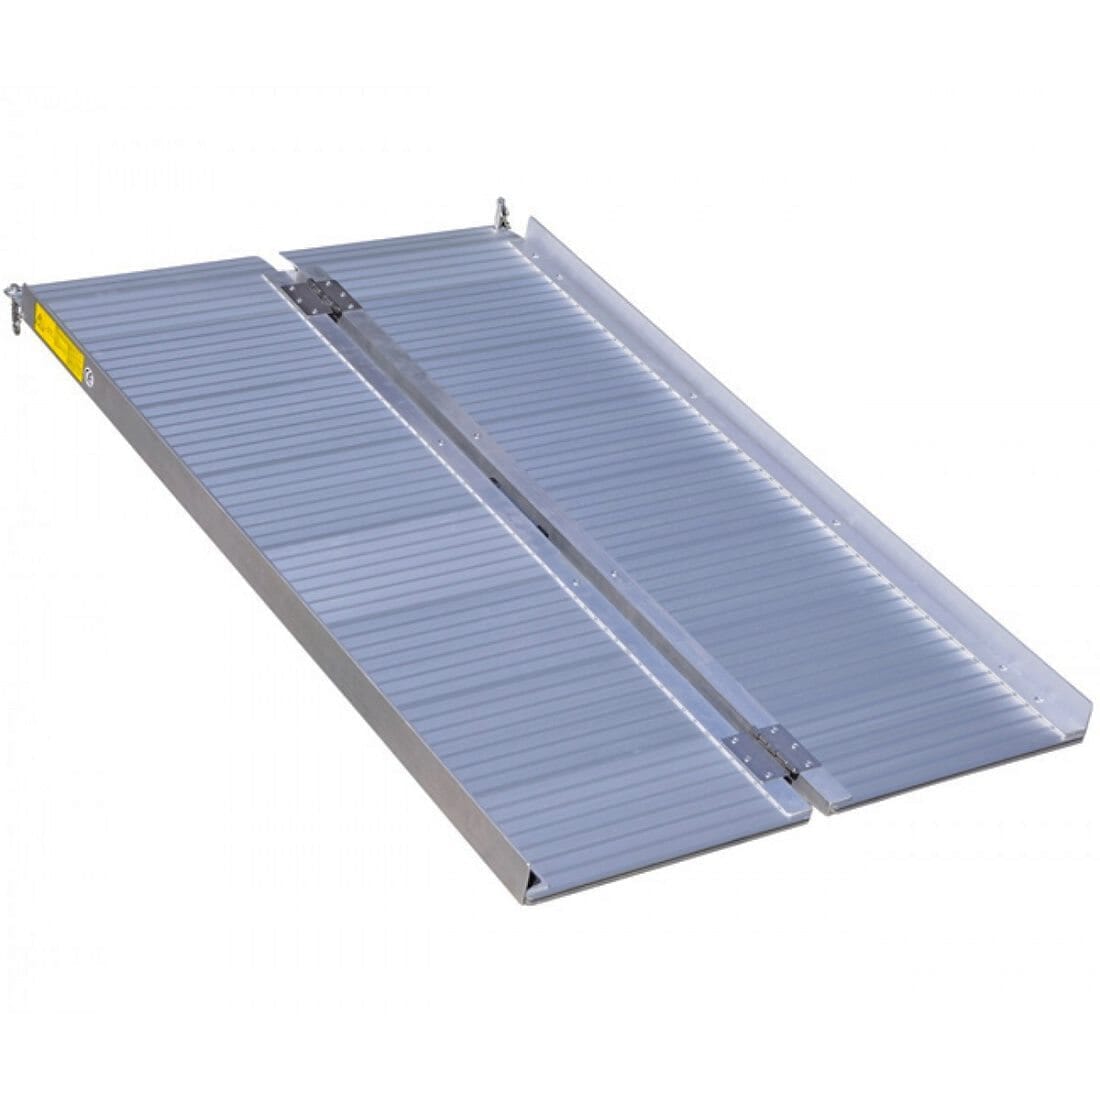 View Suitcase Ramp 3ft information